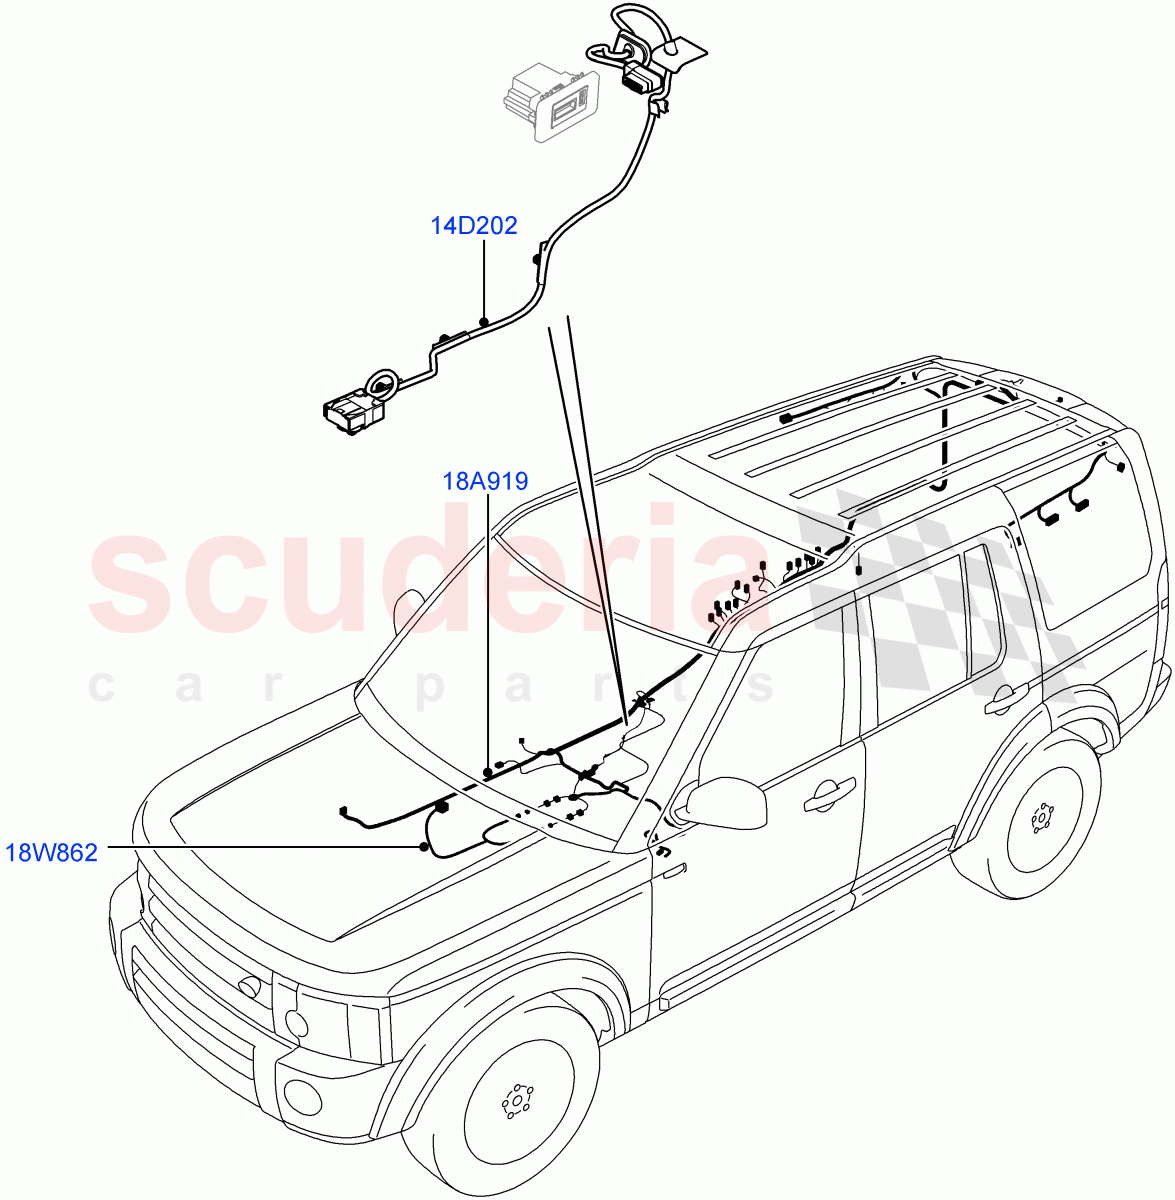 Electrical Wiring - Body And Rear(Audio/Navigation/Entertainment)((V)FROMAA000001,(V)TOAA999999) of Land Rover Land Rover Discovery 4 (2010-2016) [3.0 Diesel 24V DOHC TC]